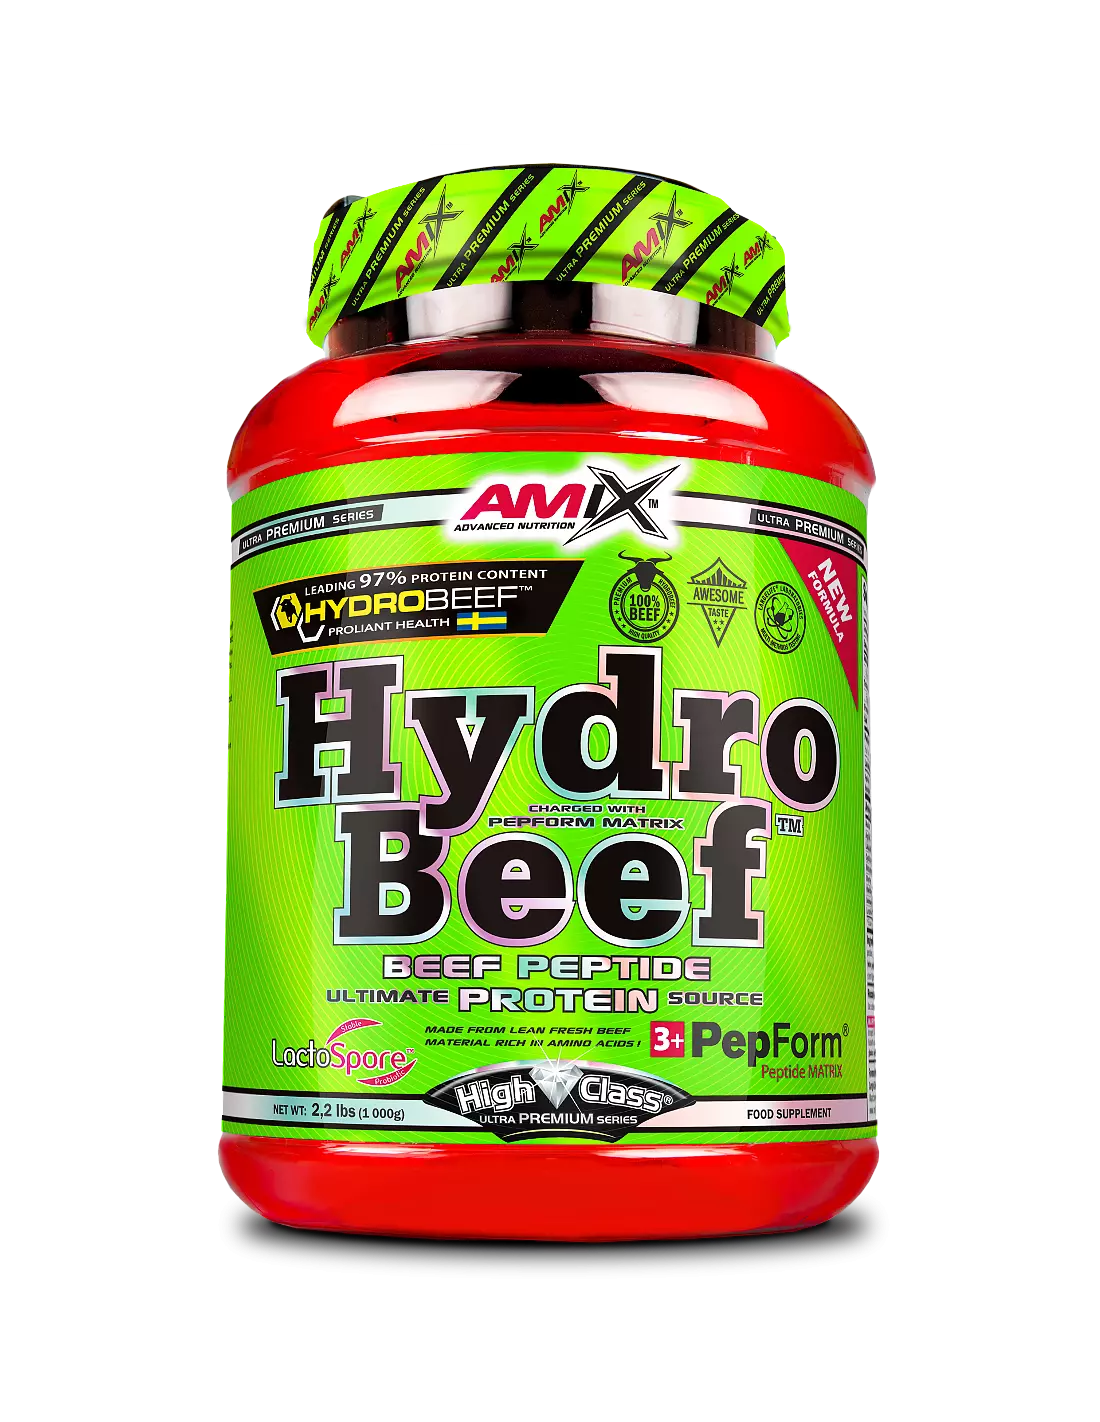 AMIX Hydro Beef Protein (1 kg)